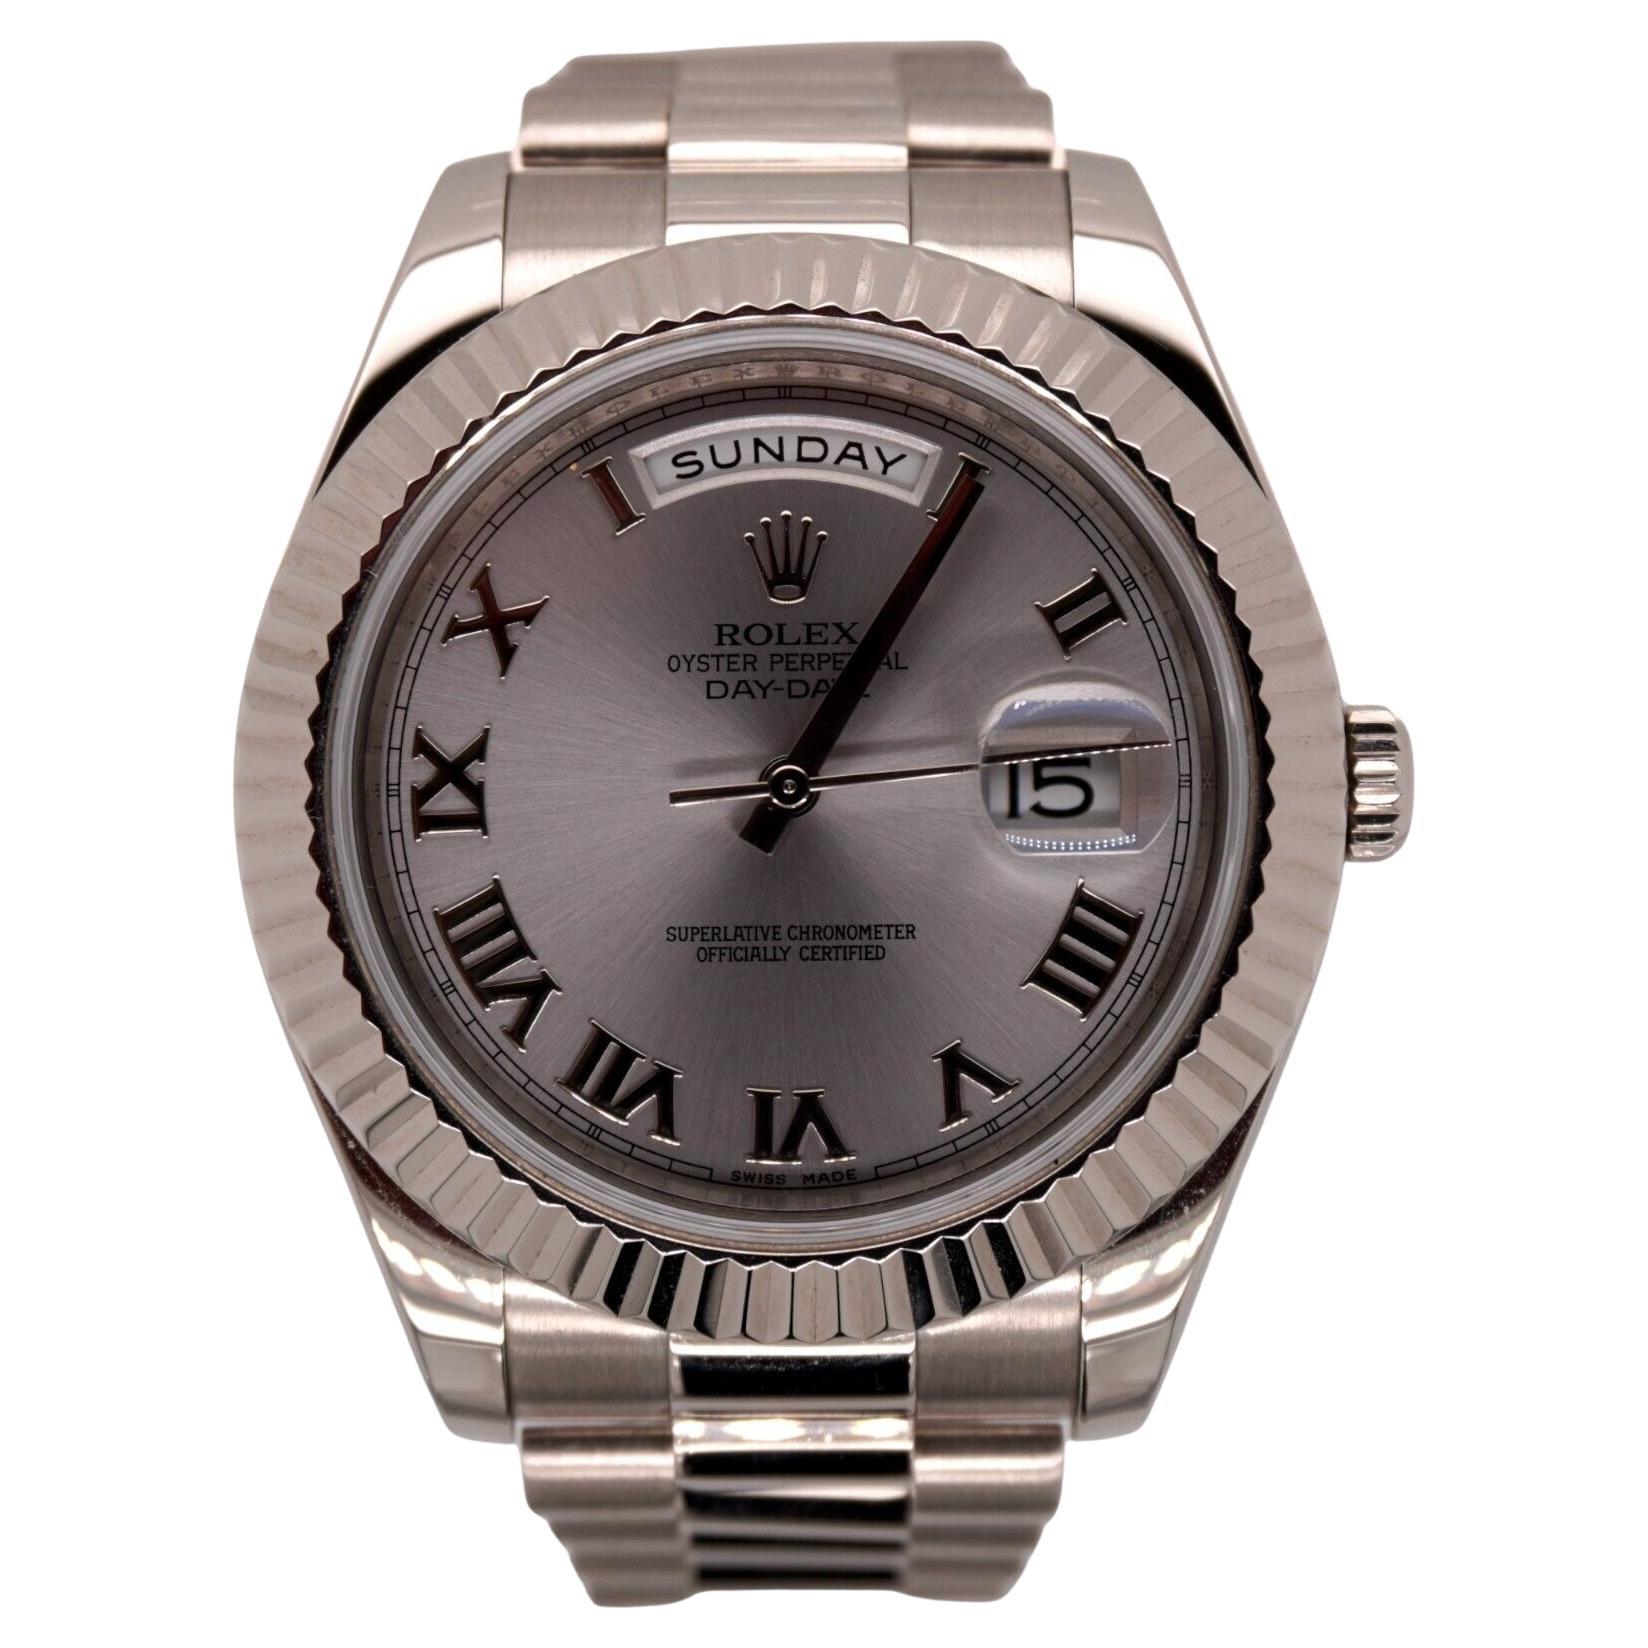 Rolex Day-Date 40 President 18k White Gold Men's Watch Silver DIAL Ref: 218239 For Sale